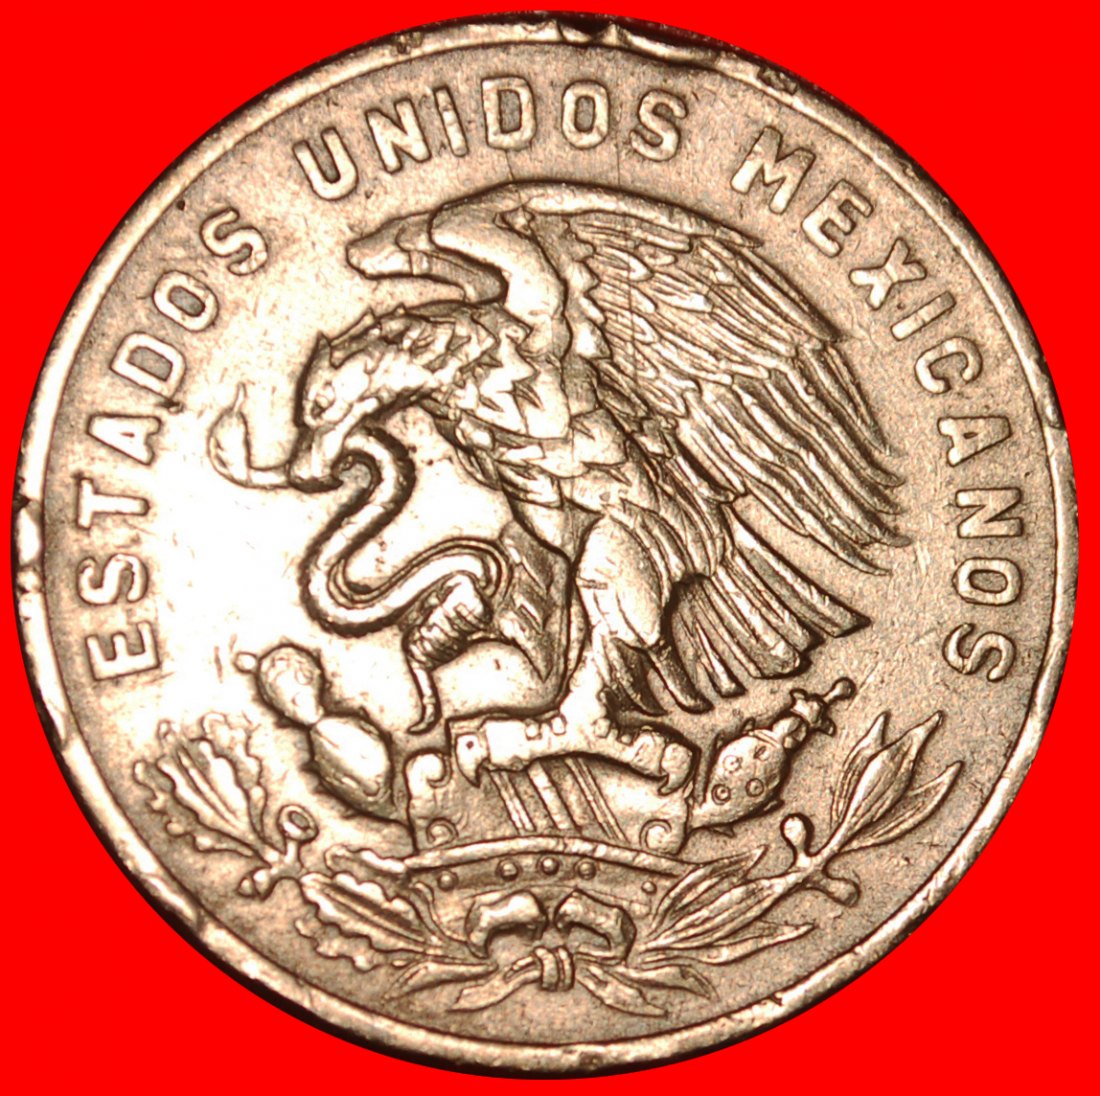  * PYRAMID OF THE SUN (1943-1974): MEXICO ★ 20 CENTAVOS 1957!★LOW START ★ NO RESERVE!   